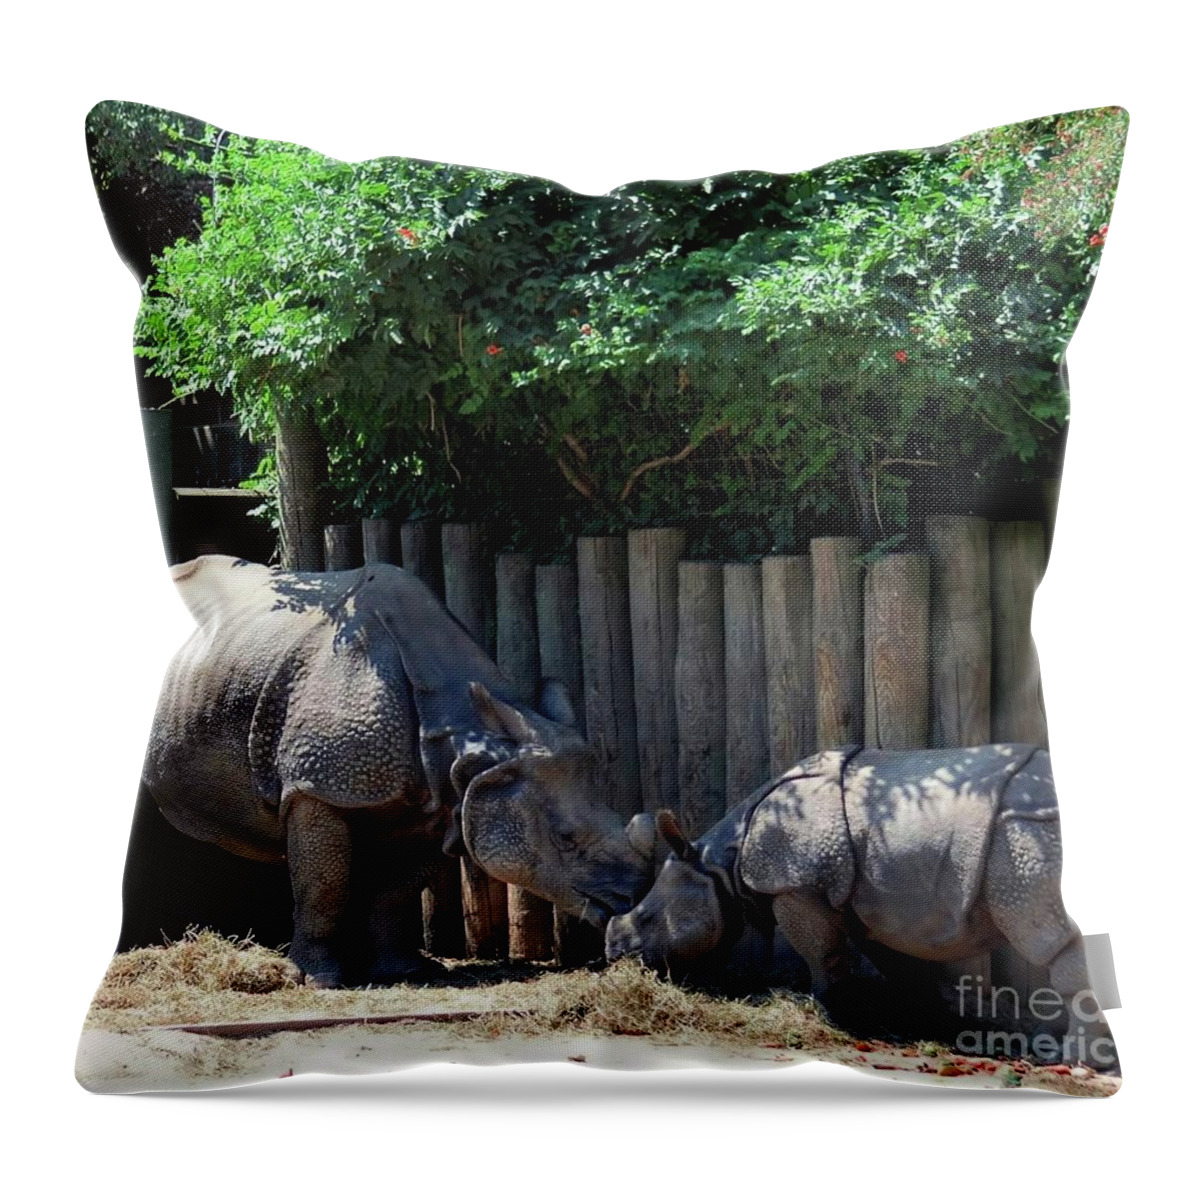 Rhinoceros Throw Pillow featuring the photograph Mom Kissing Baby by Kathleen Struckle